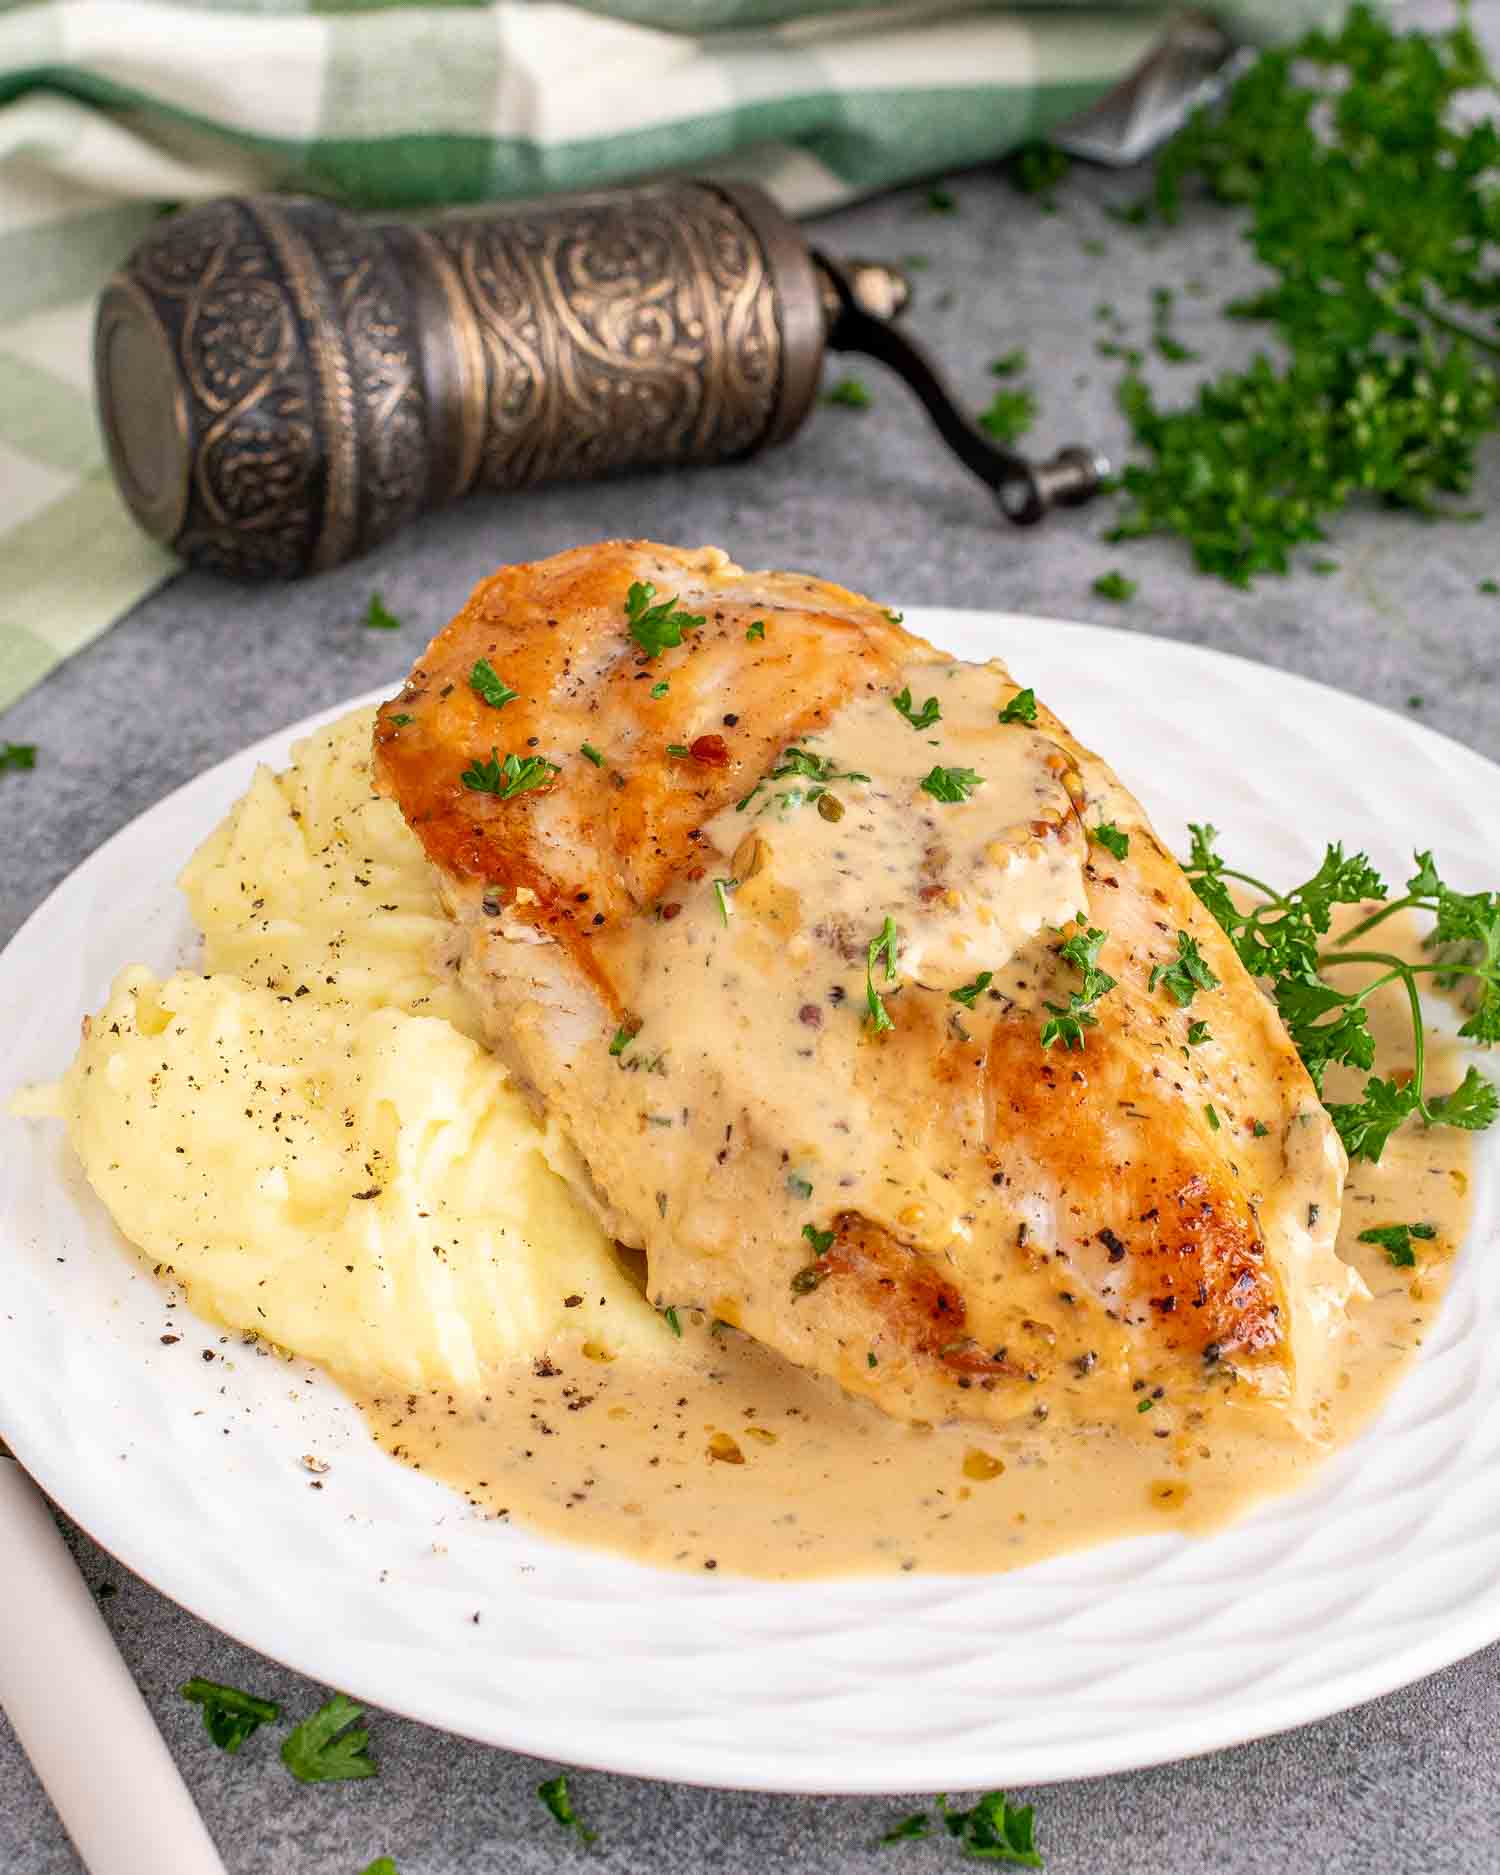 a serving of creamy mustard chicken breast along side some mashed potatoes garnished with parsley.